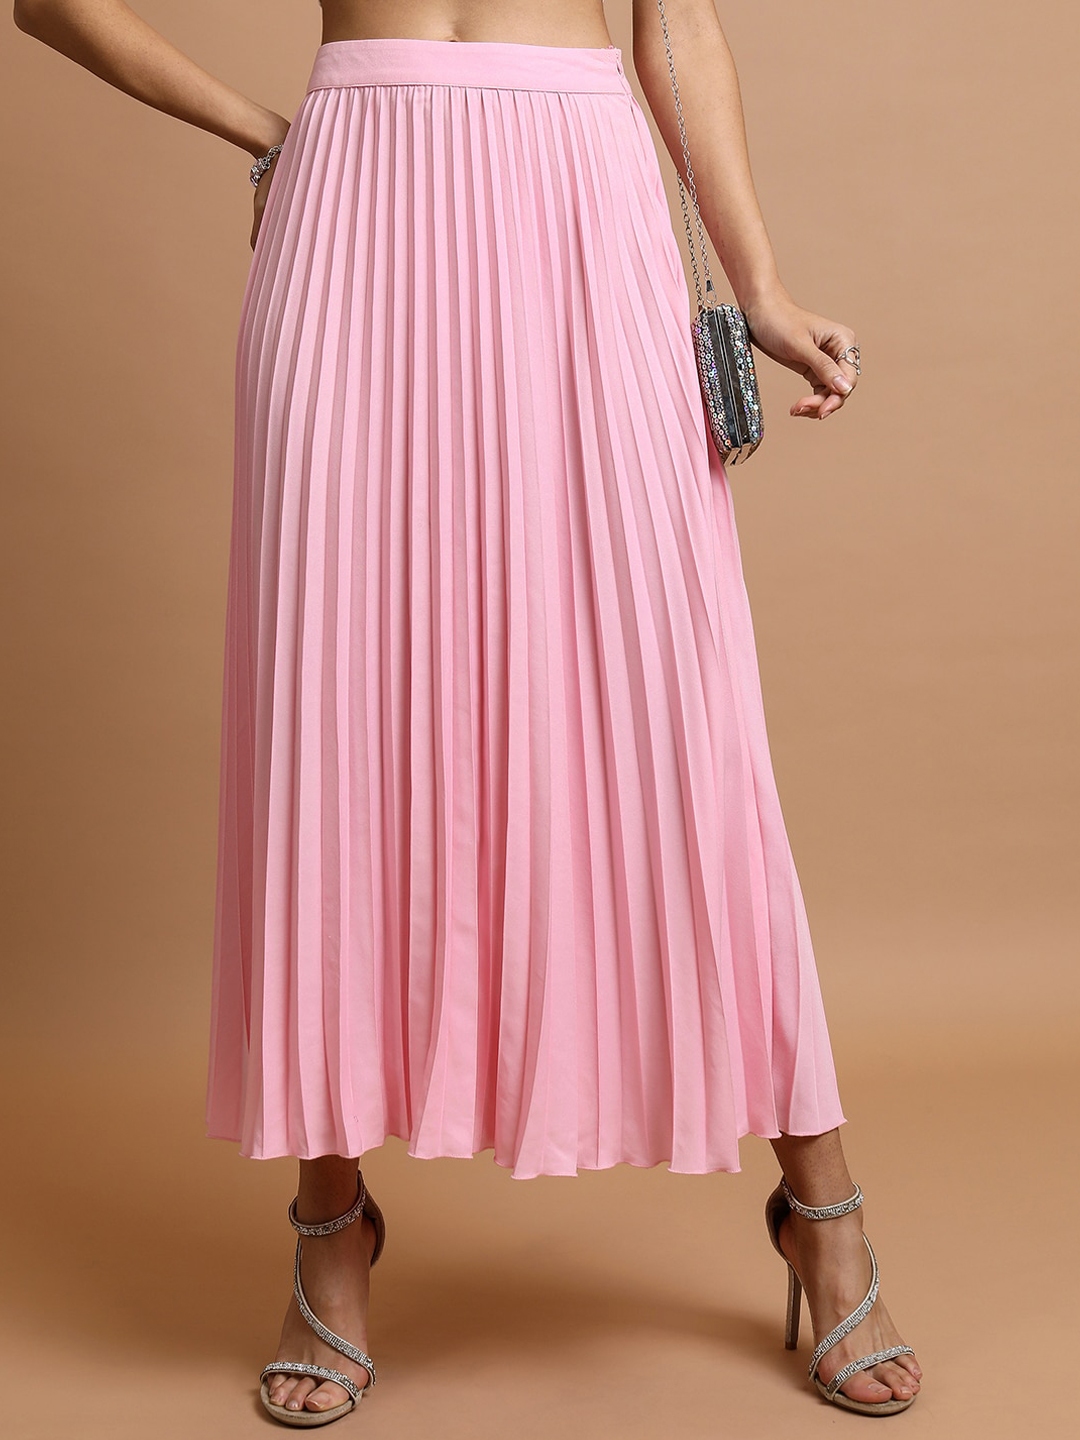 Tokyo Talkies Pink Mid-Rise Pleated Accordion Pleated Maxi A-Line Skirt (30) by Myntra